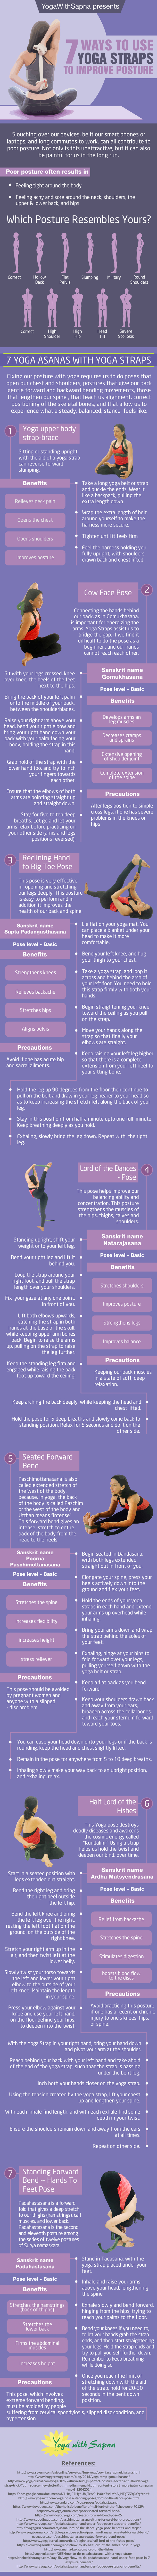 How to use Yoga Straps to improve posture - 7 Poses to try (Infographic)